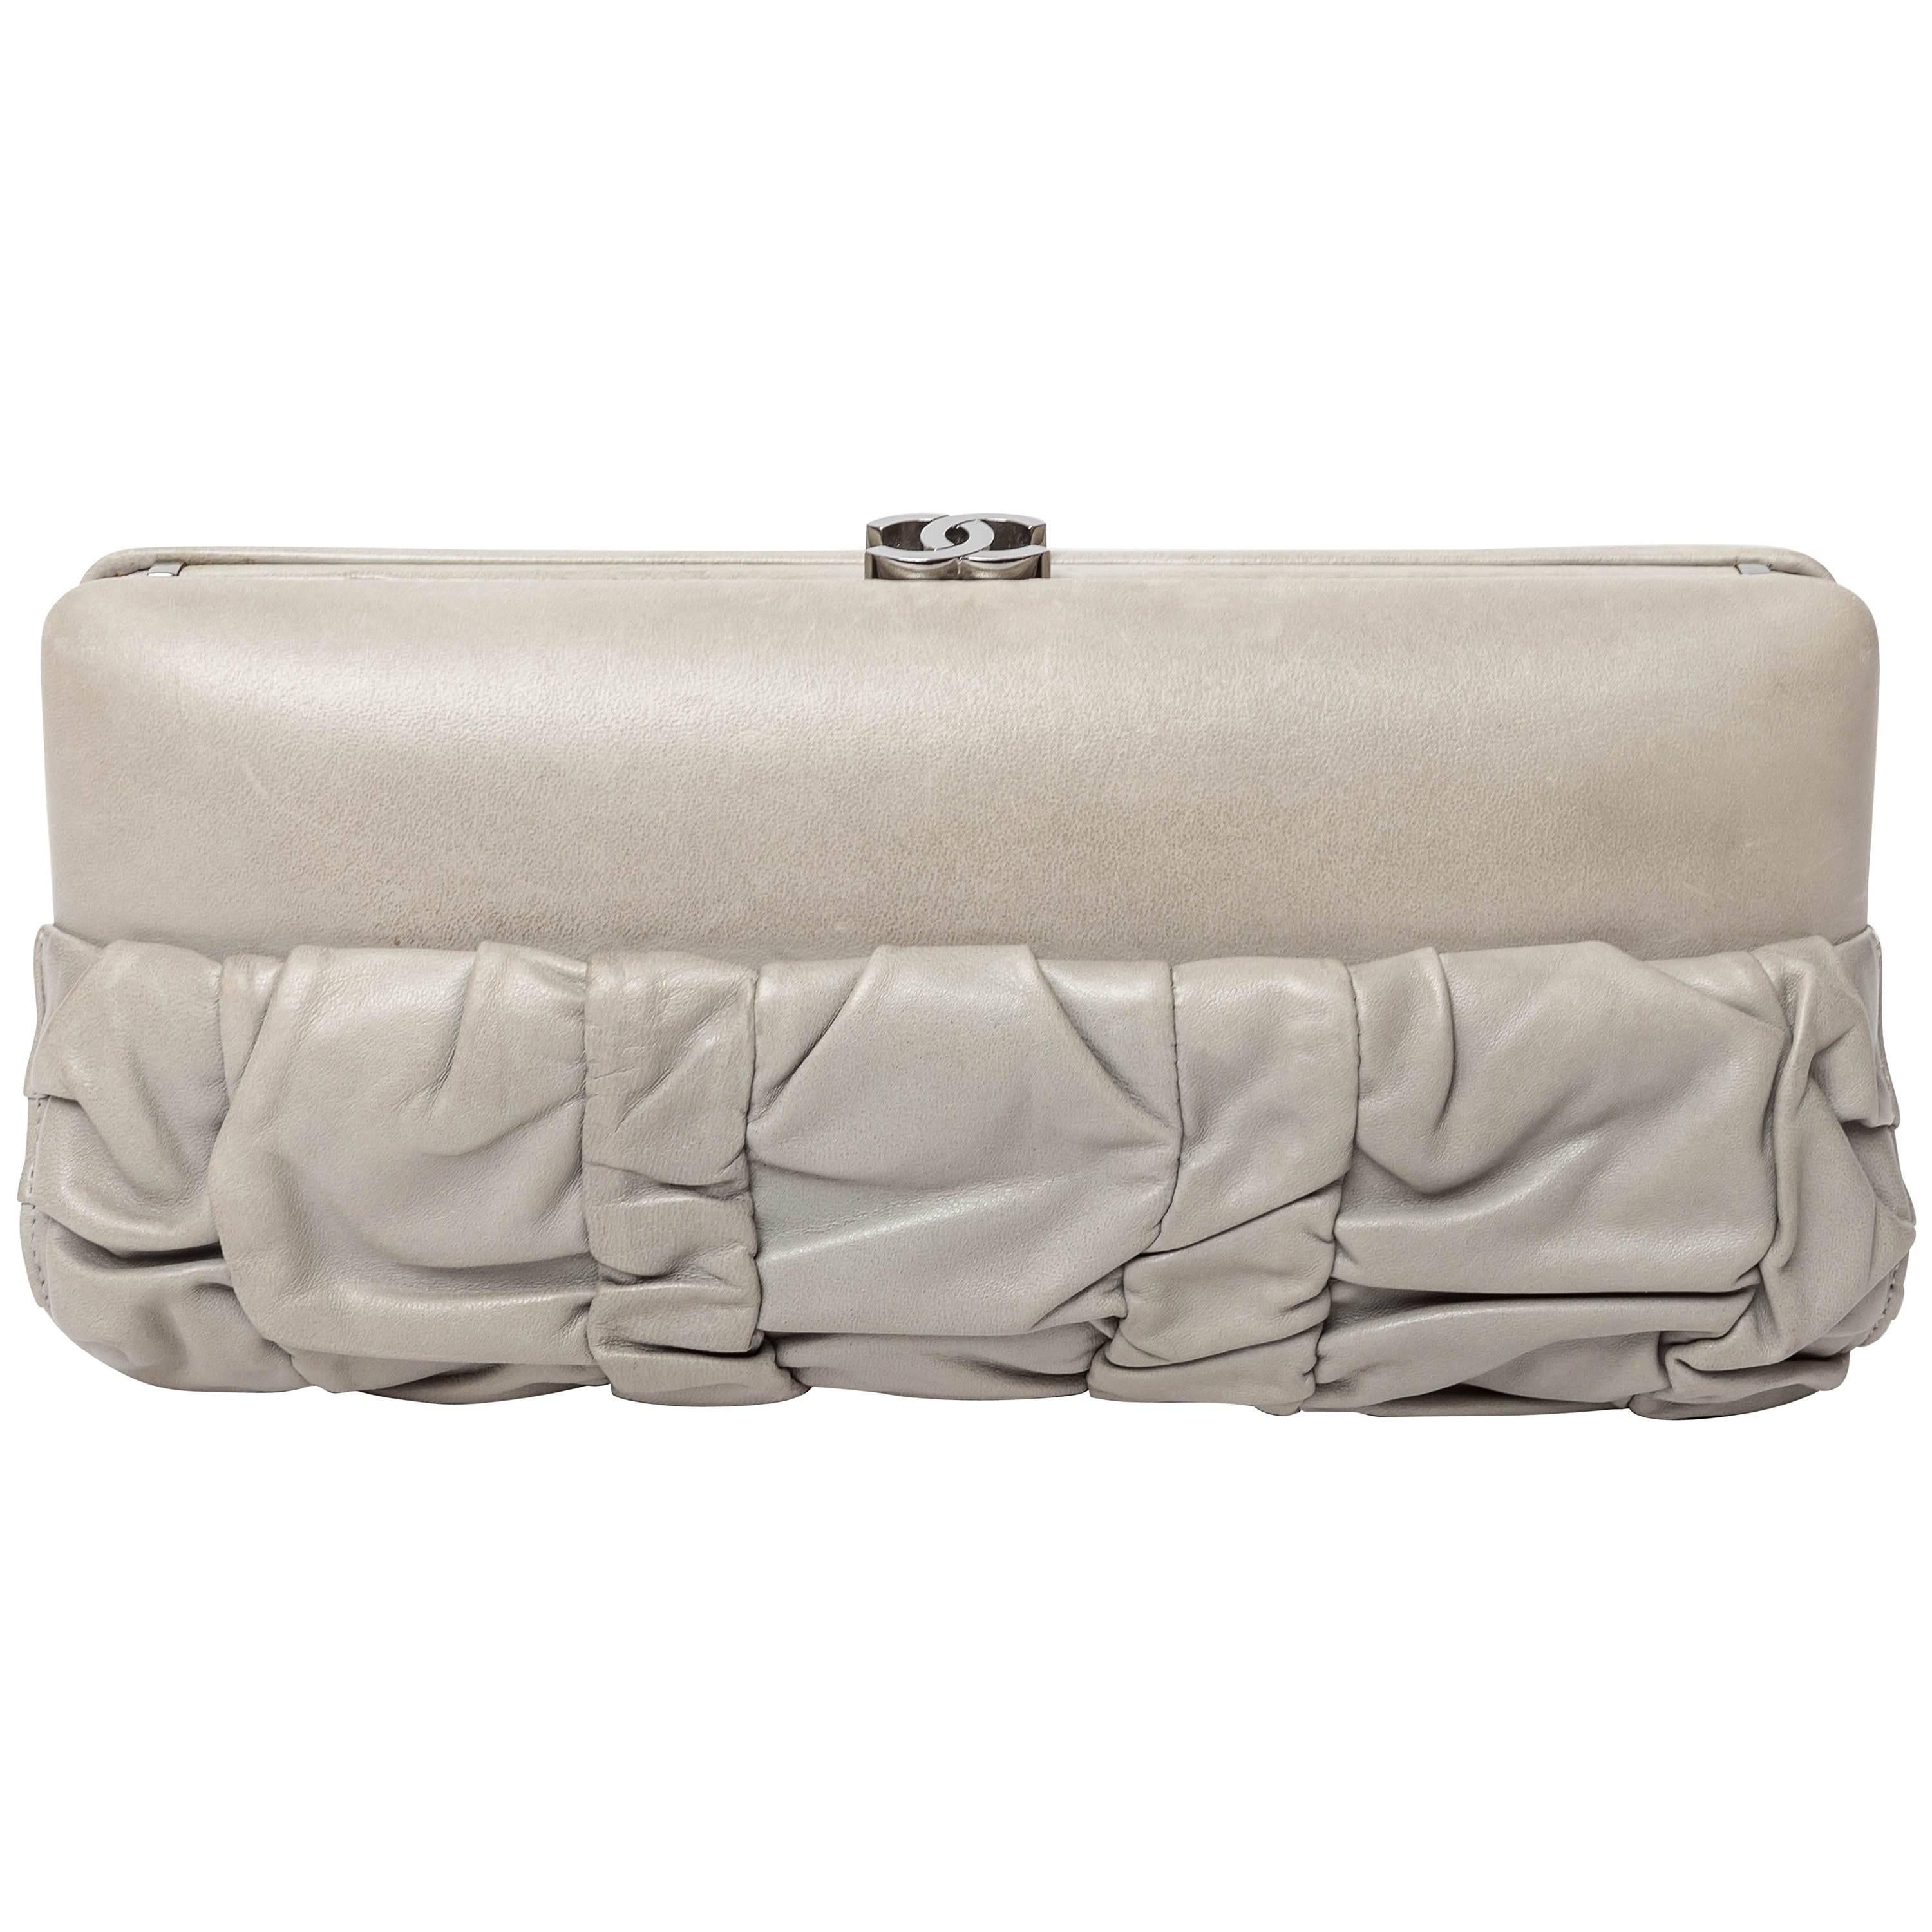 Chanel Grey Lambskin Clutch with Optional Shoulder Strap